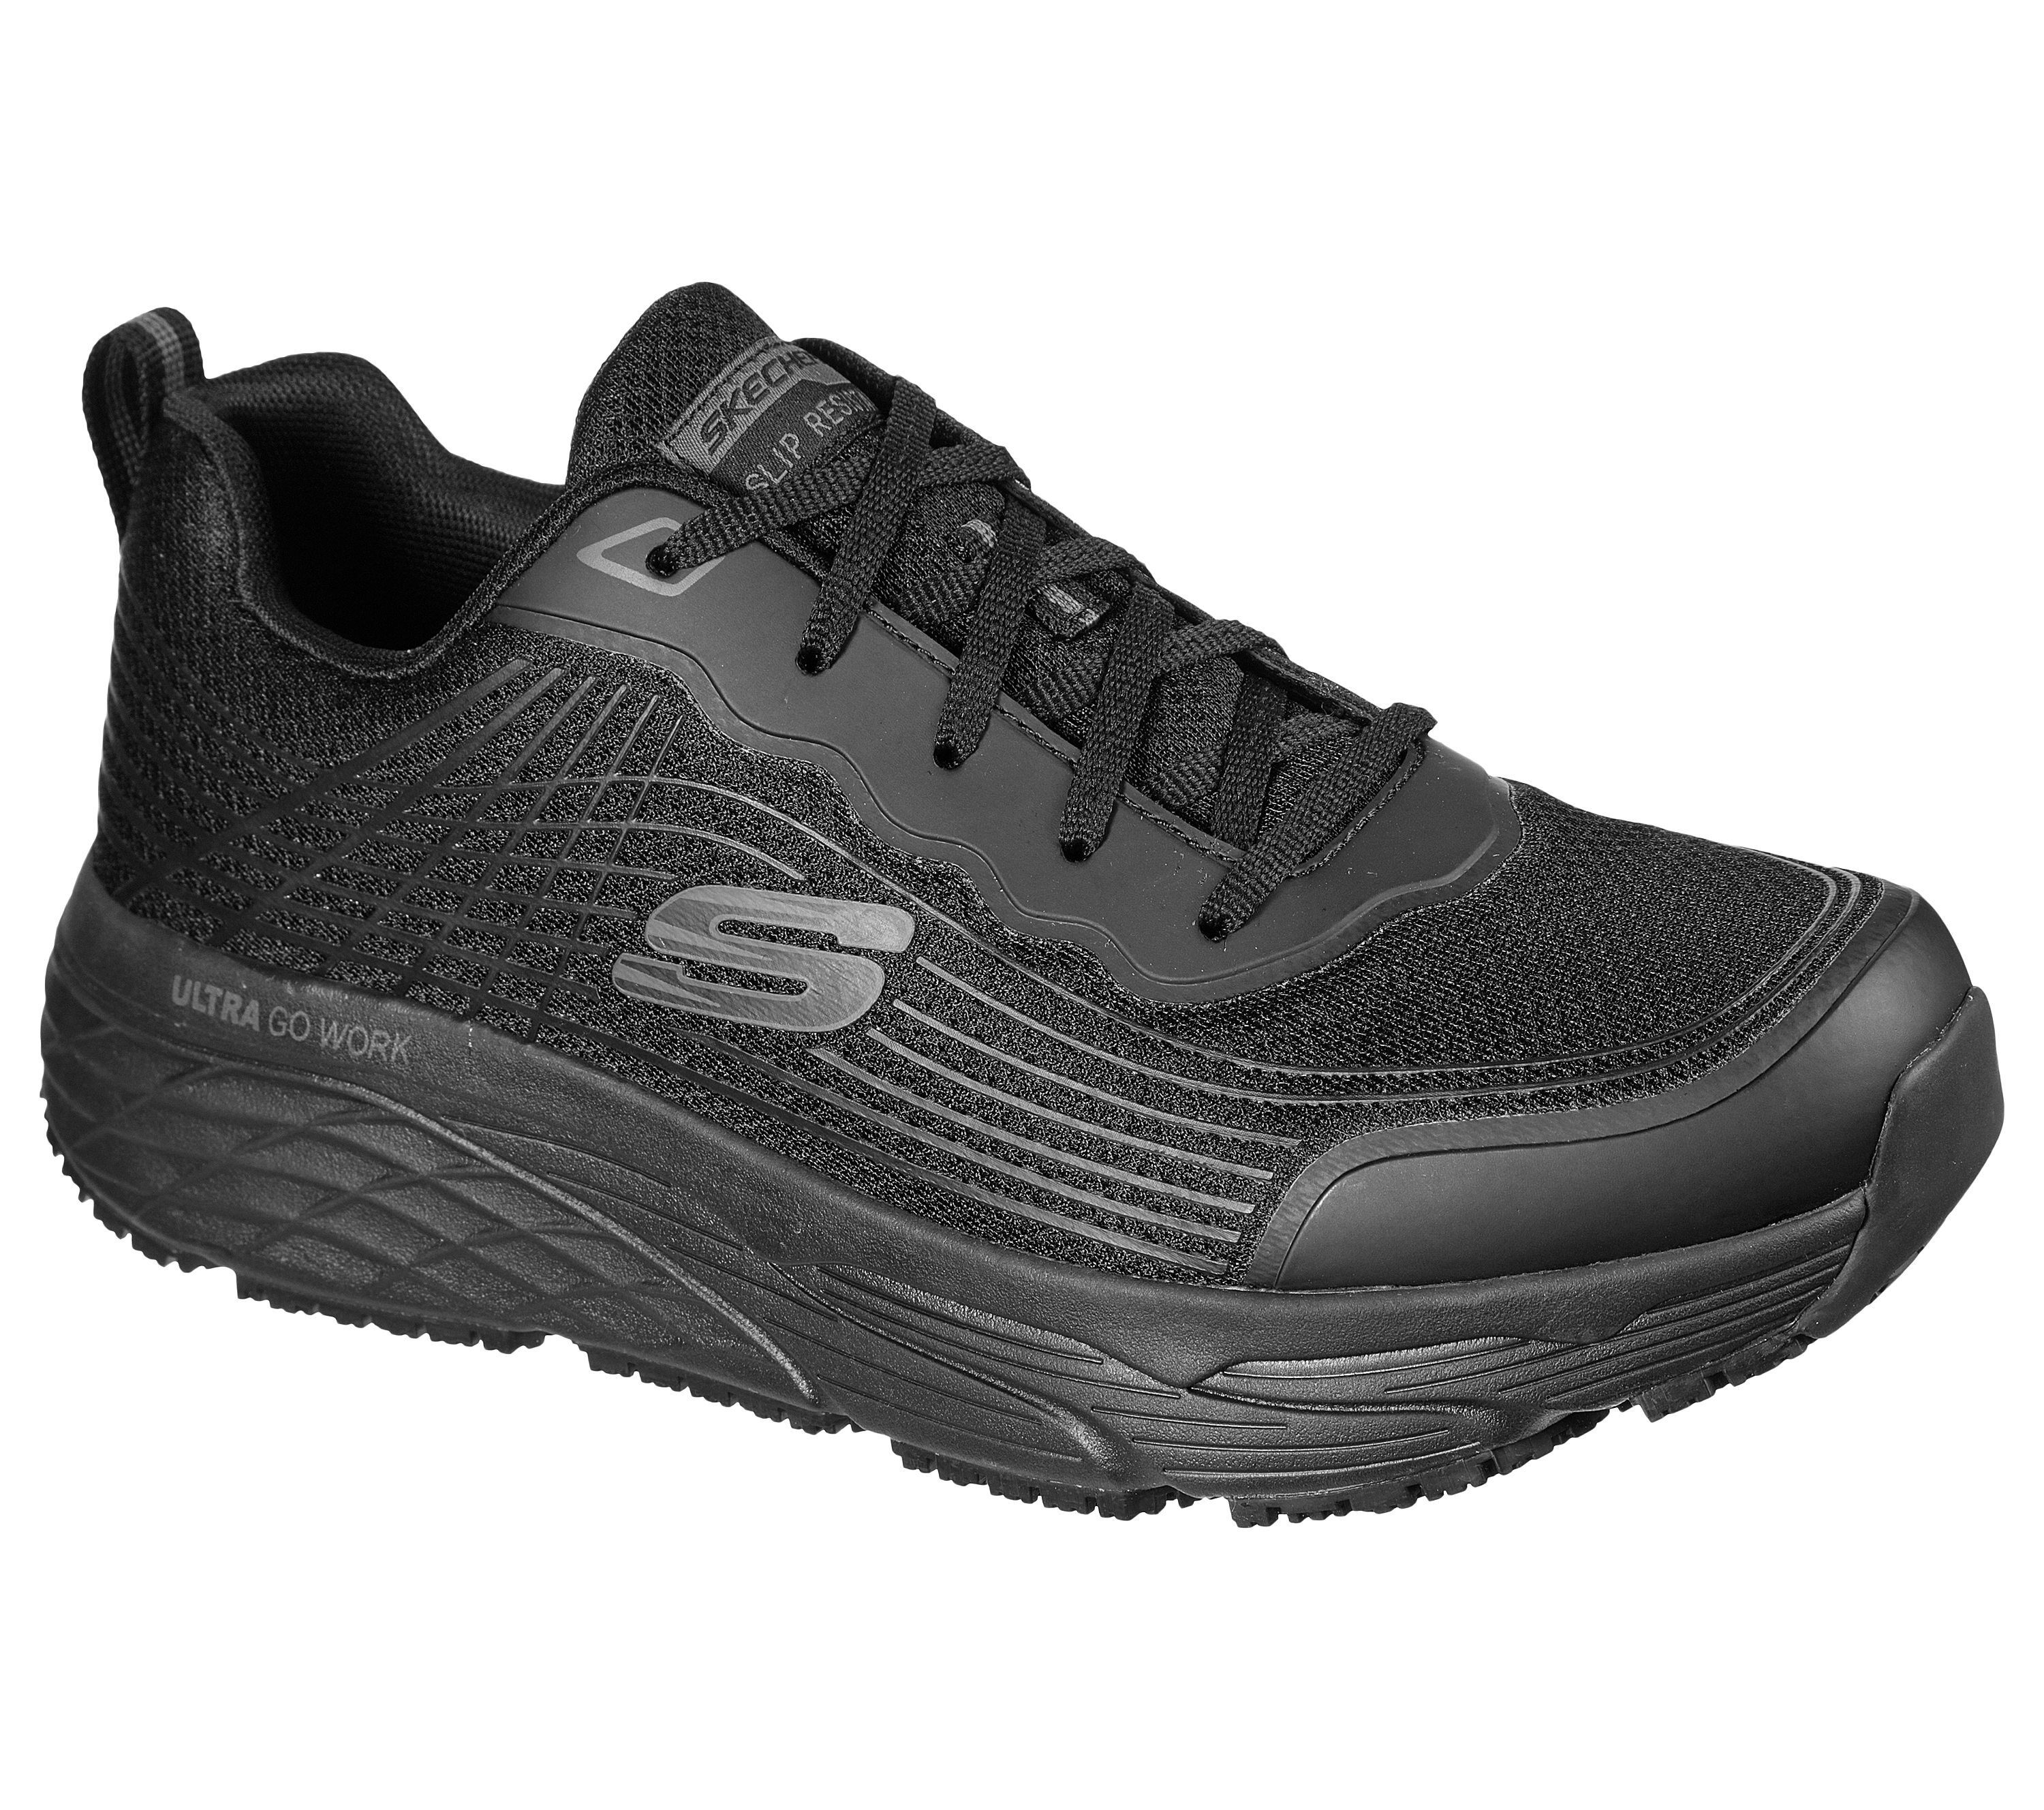 show me skechers work shoes